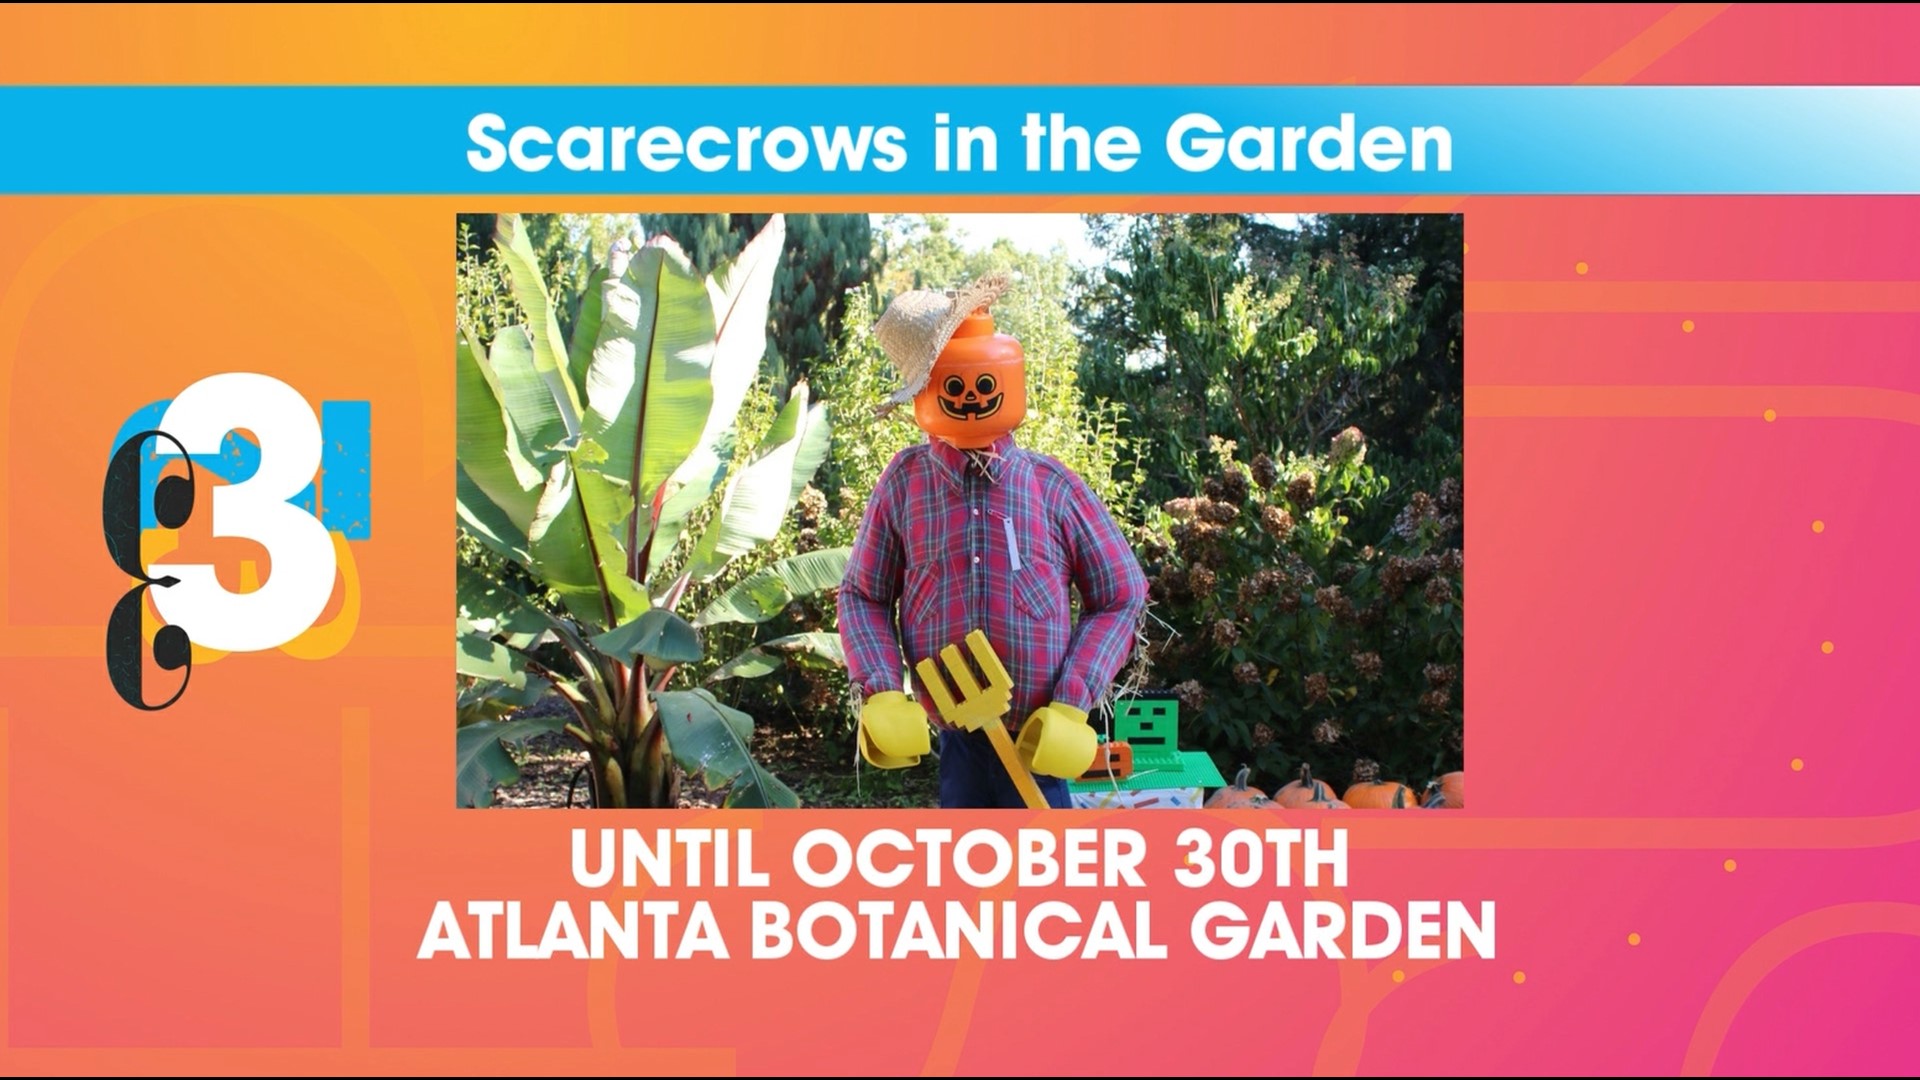 From monsters to scarecrows, get your Halloween-themed events checklist in 4 The Weekend, sponsored by Gatlinburg, TN.